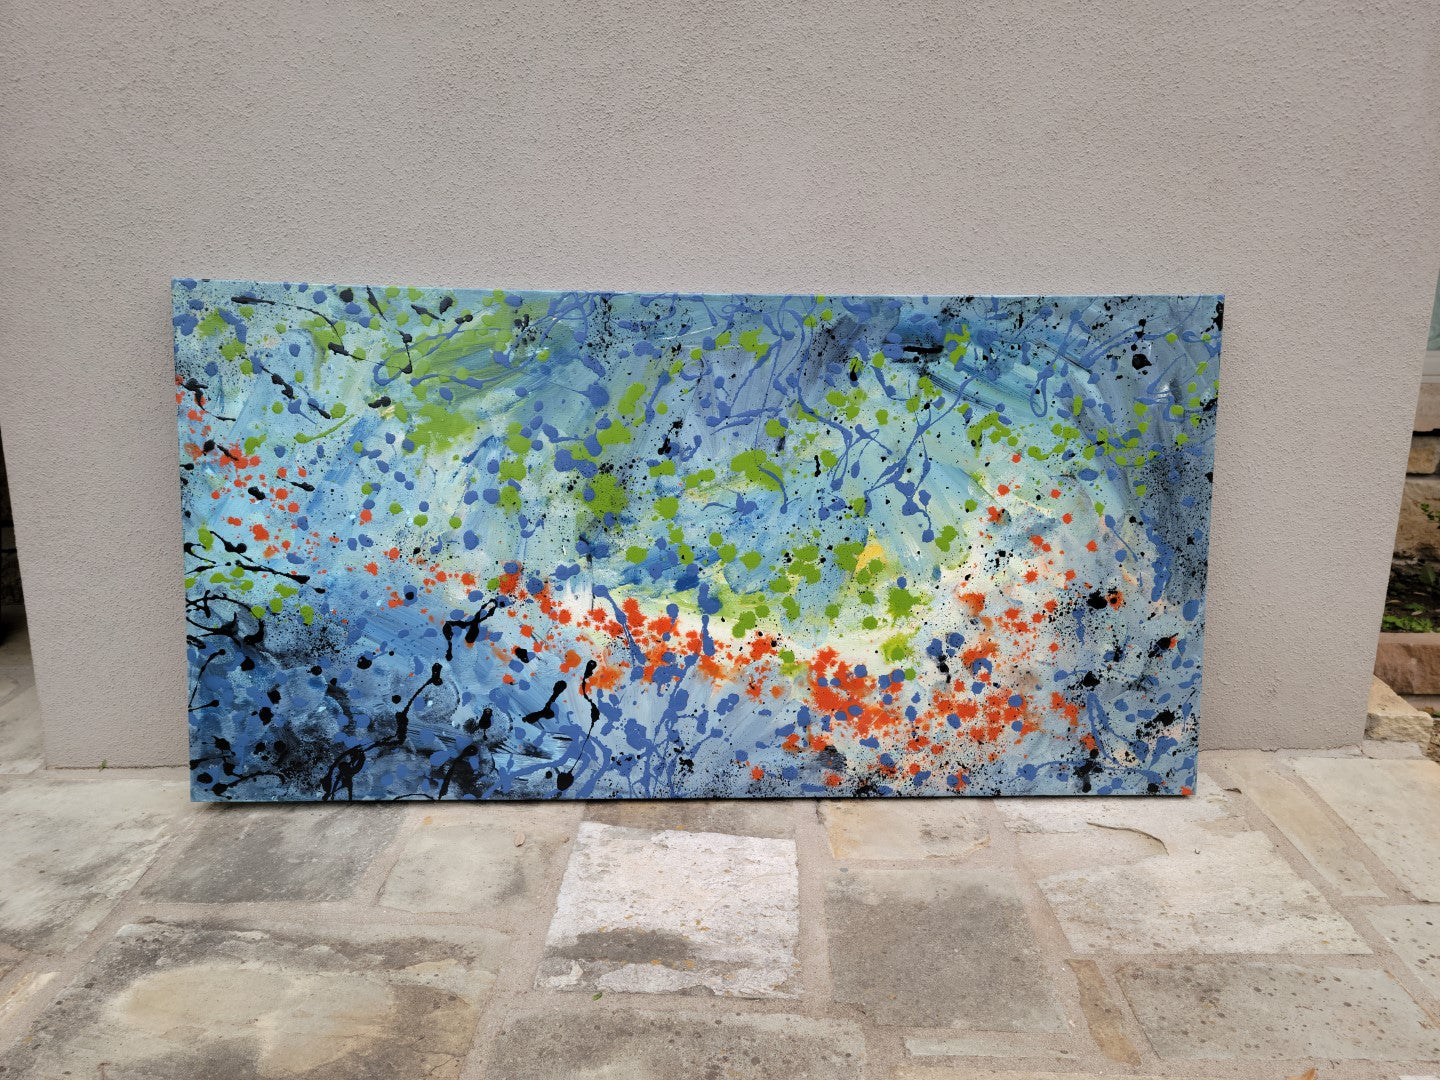 Entangled Eloquence - Original Abstract Painting in Austin Texas 24" x 48"